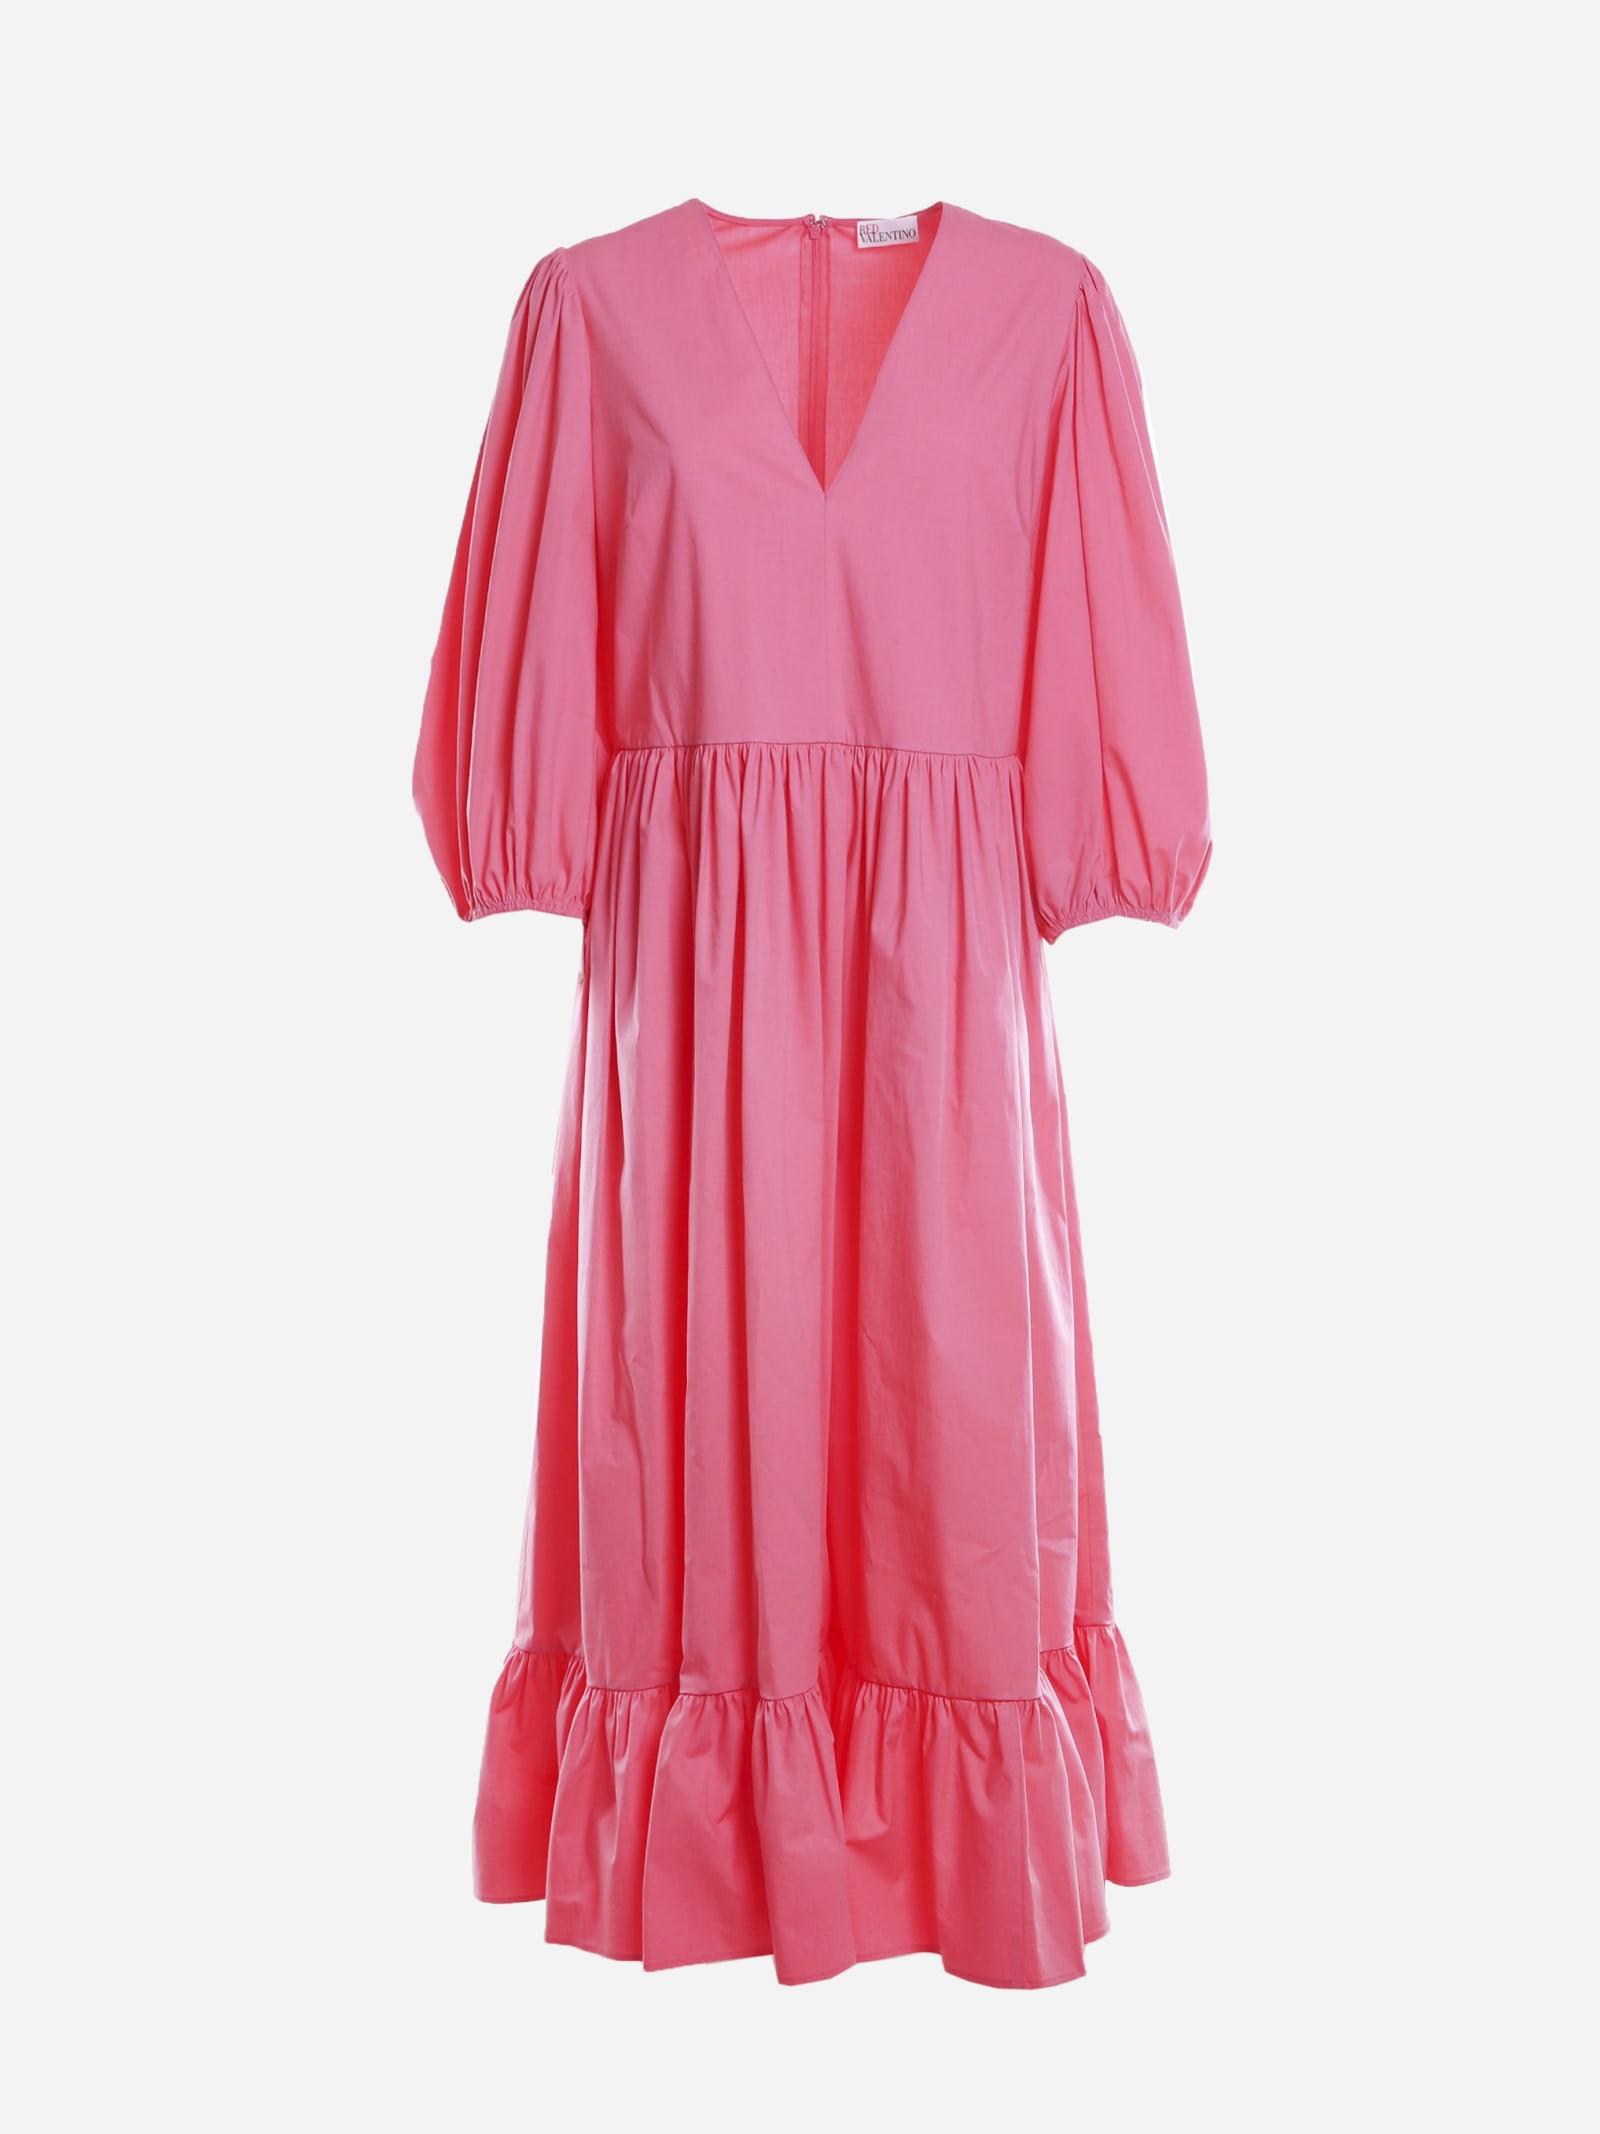 RED Valentino Cotton Poplin Dress With Puff Sleeves